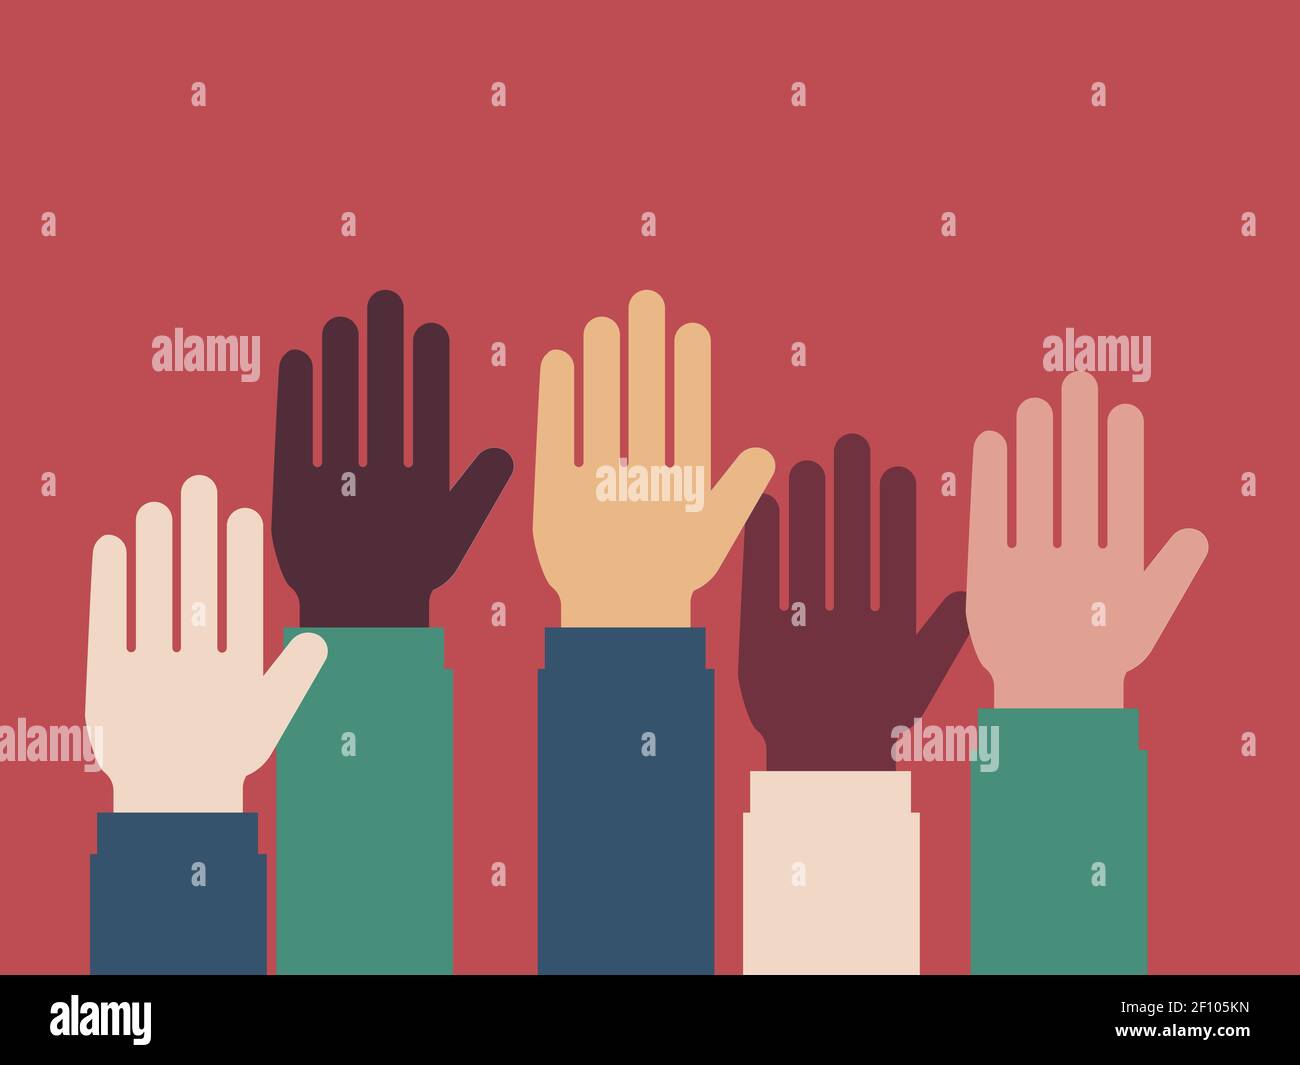 Volunteering illustration. Different hands of diferent ethnicies people raising hands up. Isolated graphic on a rolor background. Vector. Stock Vector